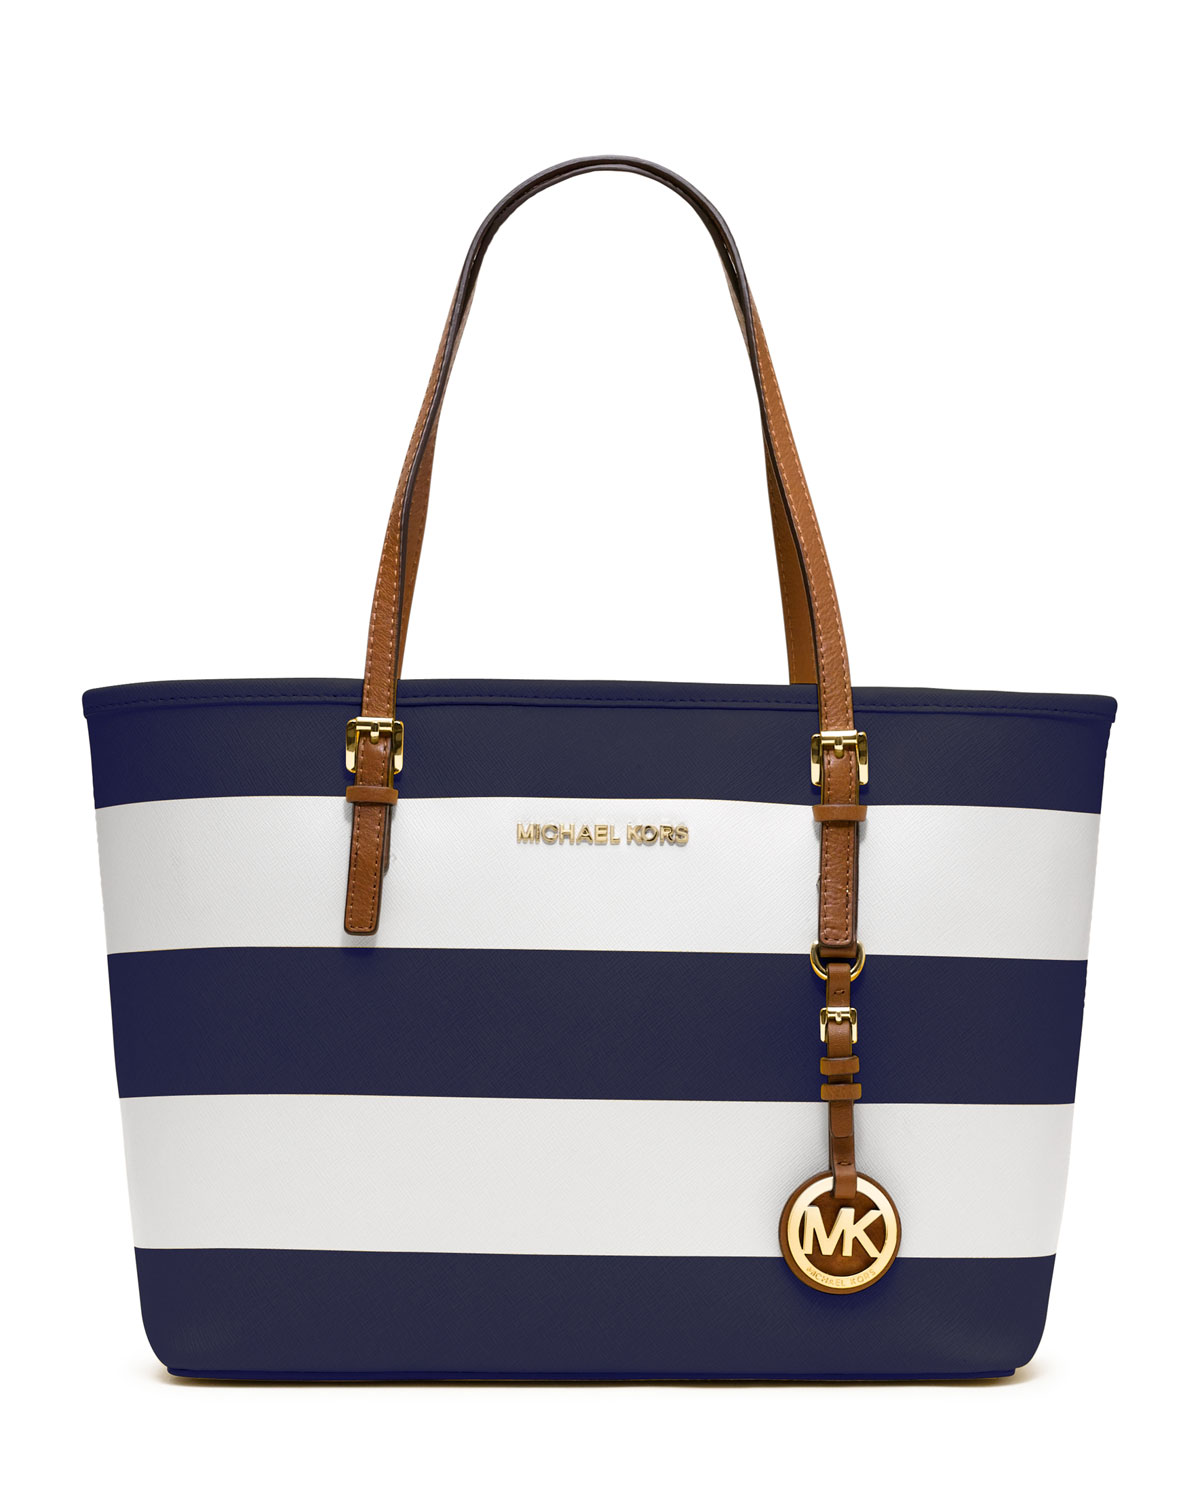 Lyst - Michael Michael Kors Small Jet Set Striped Travel Tote in Blue